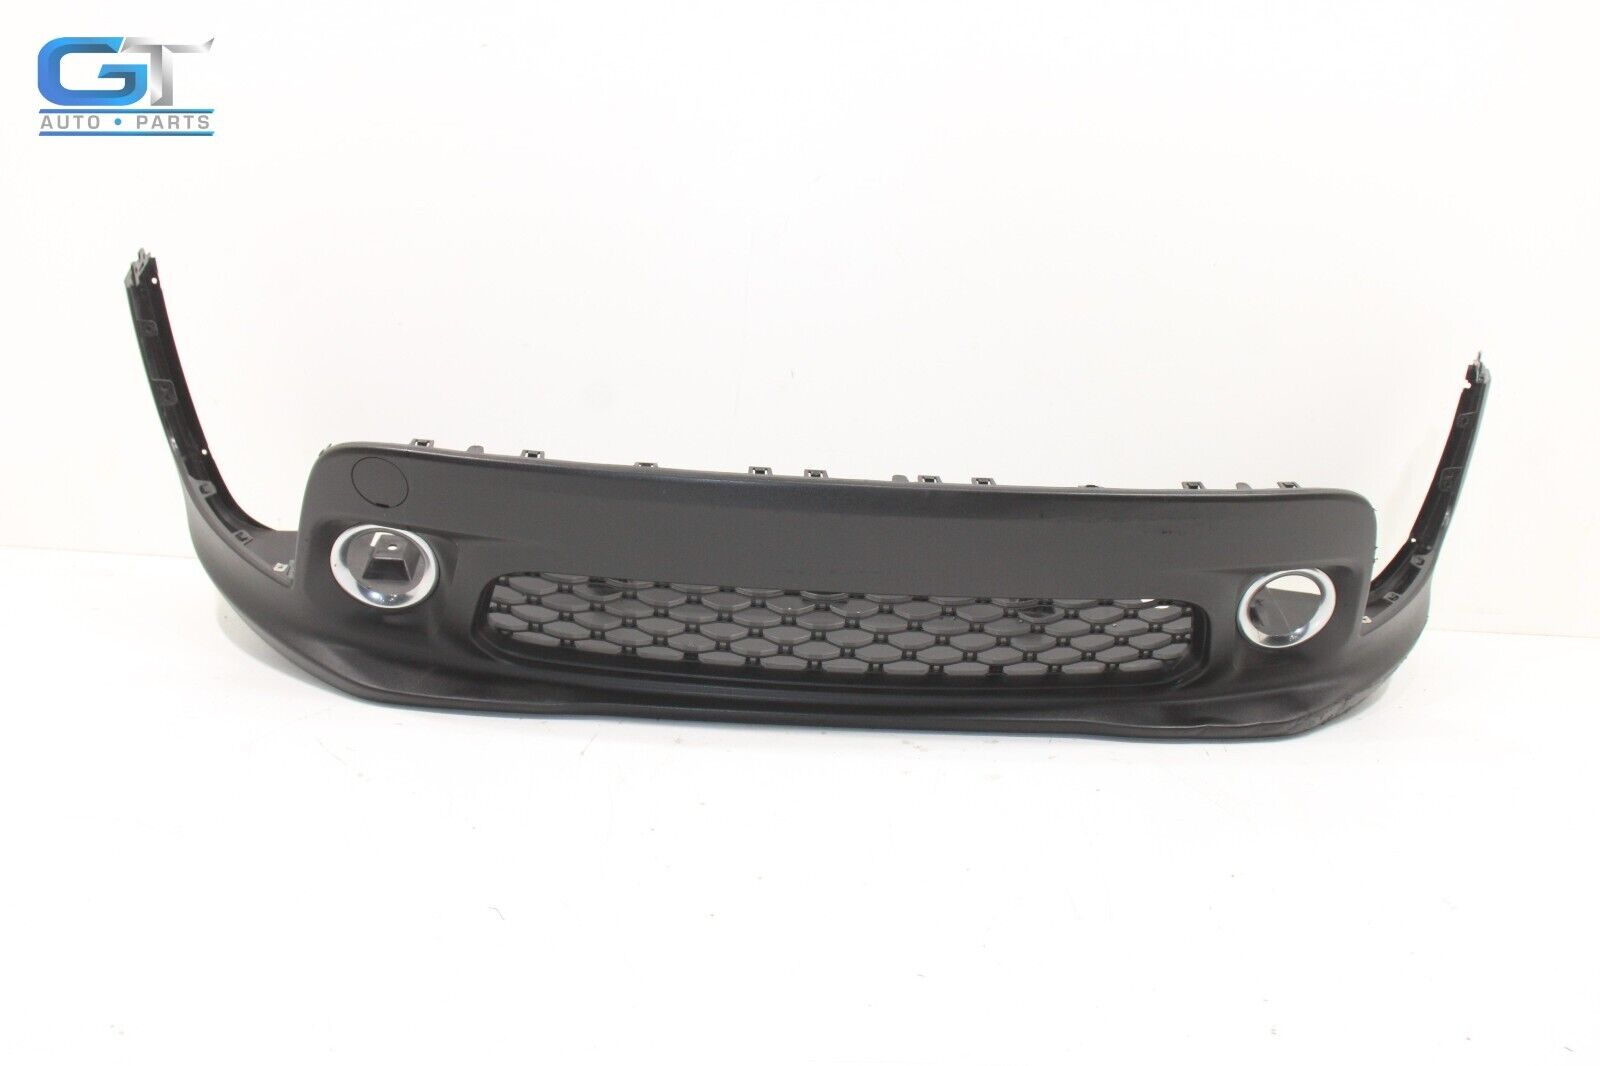 JEEP RENEGADE FRONT BUMPER LOWER COVER & GRILLE GRILL OEM 2019 - 2021 💠